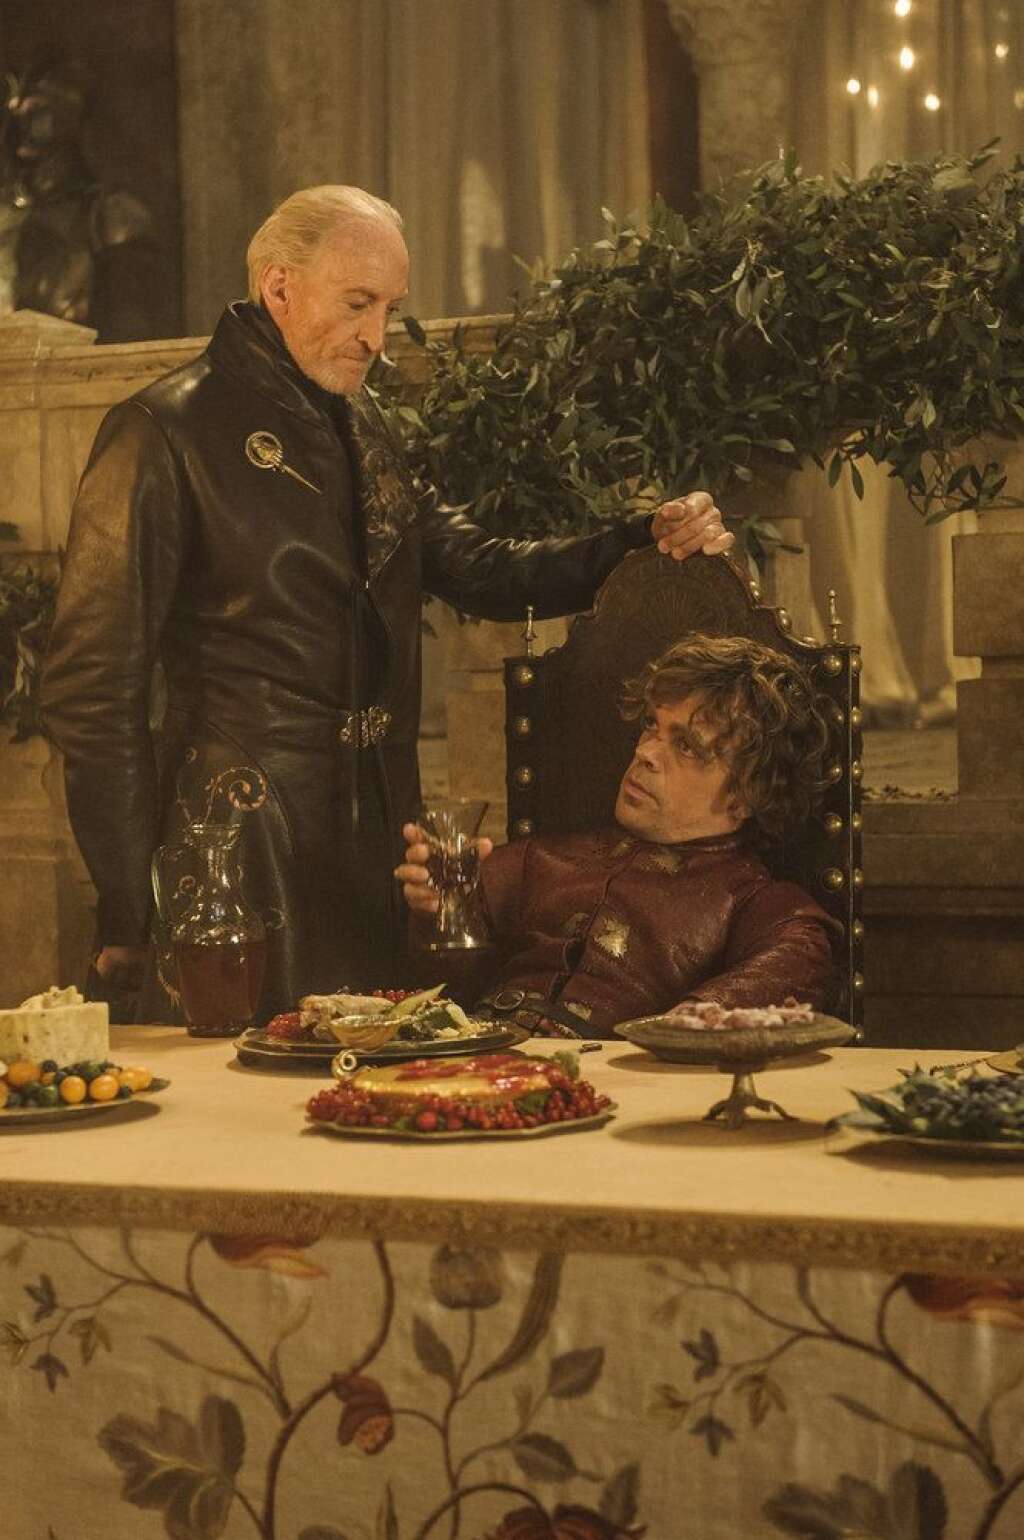 'Game Of Thrones' Season 3, Episode 8 - Charles Dance as Tywin Lannister, Peter Dinklage as Tyrion Lannister